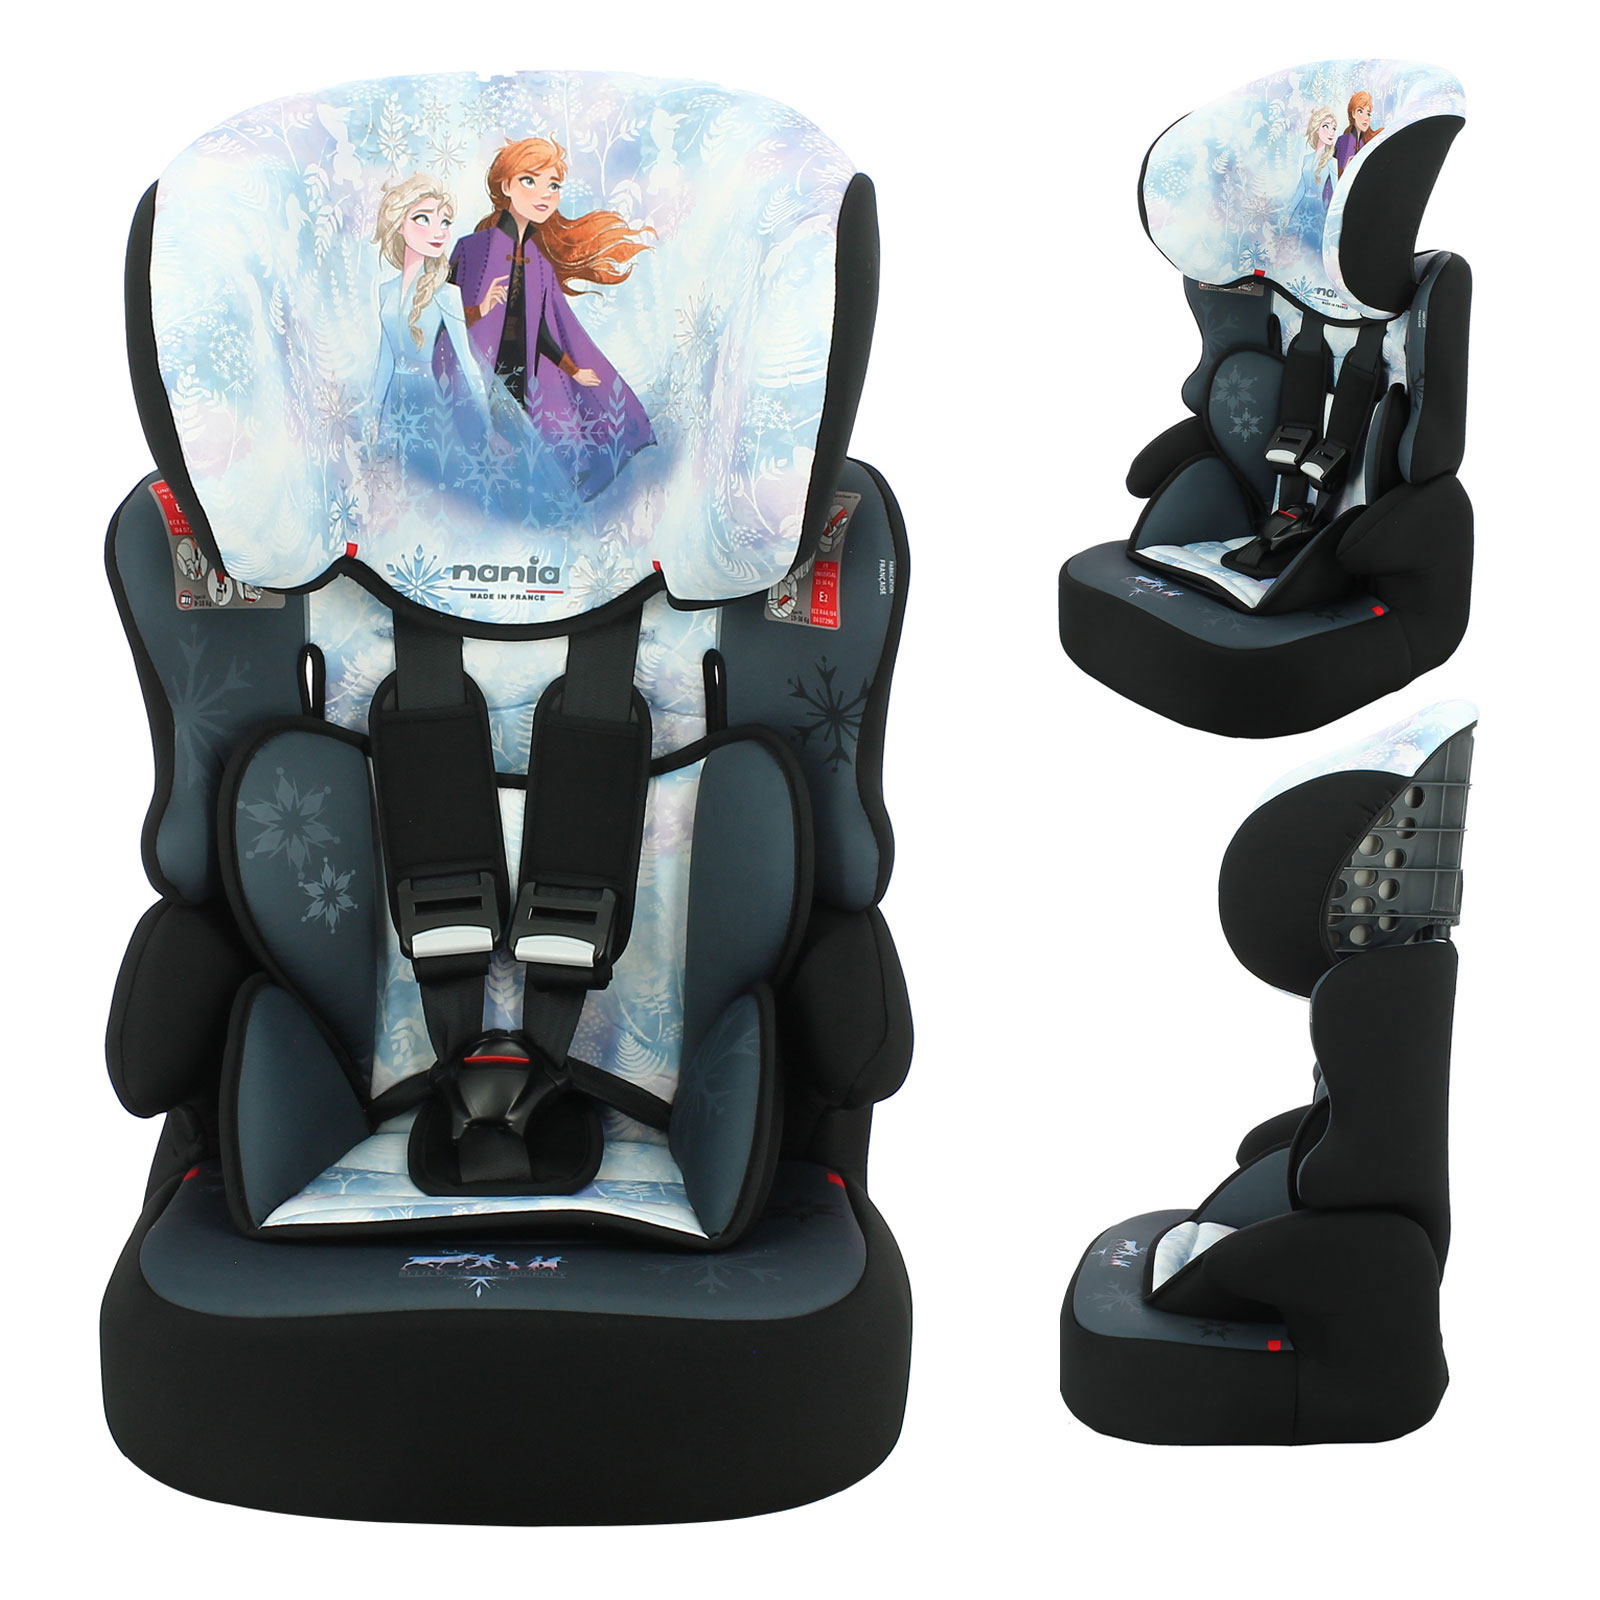 Disney Frozen Linton Comfort Plus Group 1/2/3 Car Seat with Insert - Blue (9 Months-12 Years)